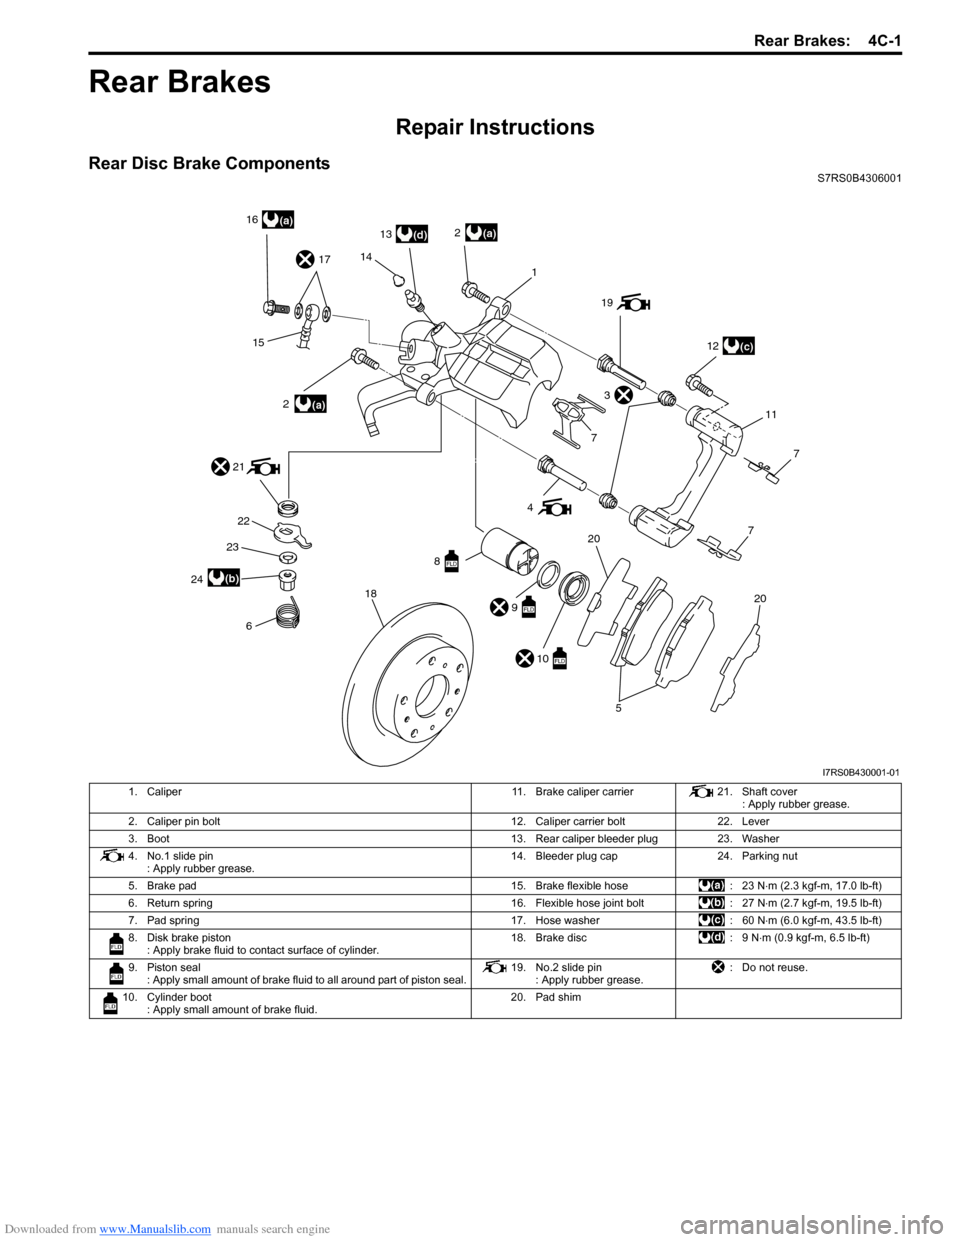 SUZUKI SWIFT 2008 2.G Service Workshop Manual Downloaded from www.Manualslib.com manuals search engine Rear Brakes:  4C-1
Brakes
Rear Brakes
Repair Instructions
Rear Disc Brake ComponentsS7RS0B4306001
(d)
(c)
(a)
(a)
(a)16171413
2
1
15 2 19
12
11